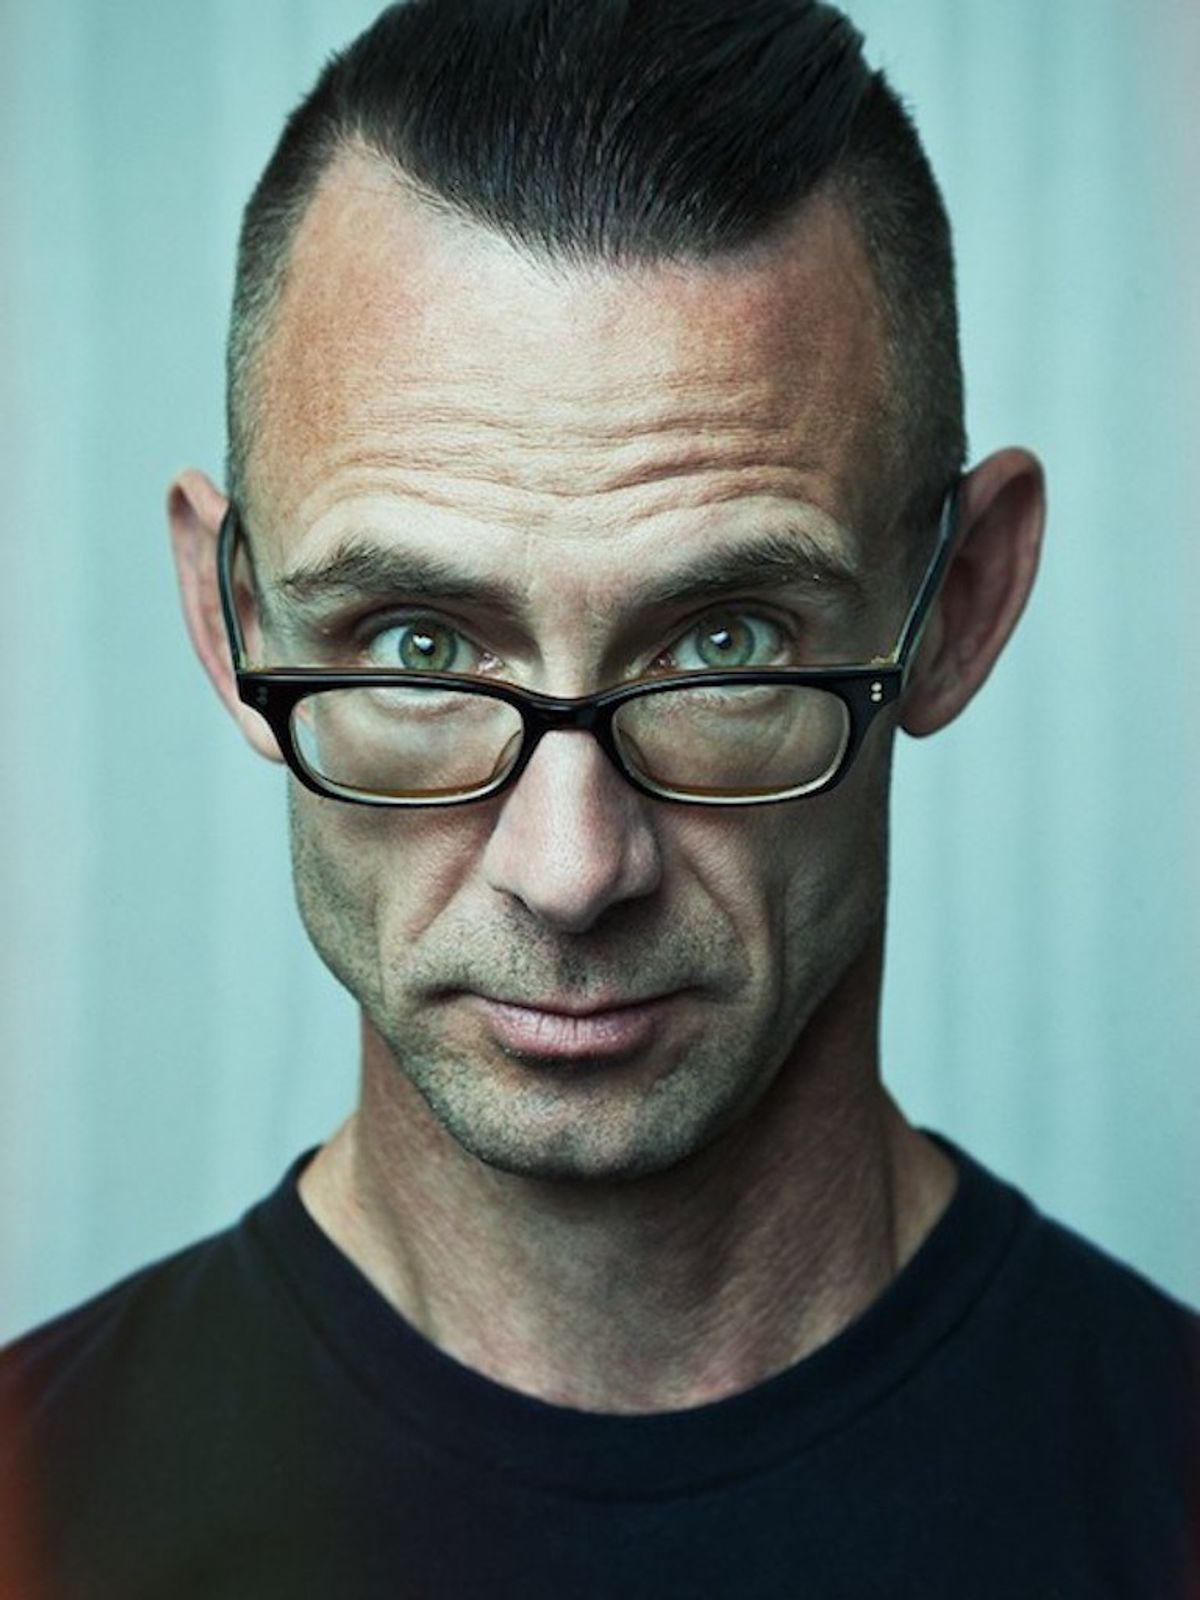 5 Awesome Books Written By Chuck Palahniuk That Aren't 'Fight Club'